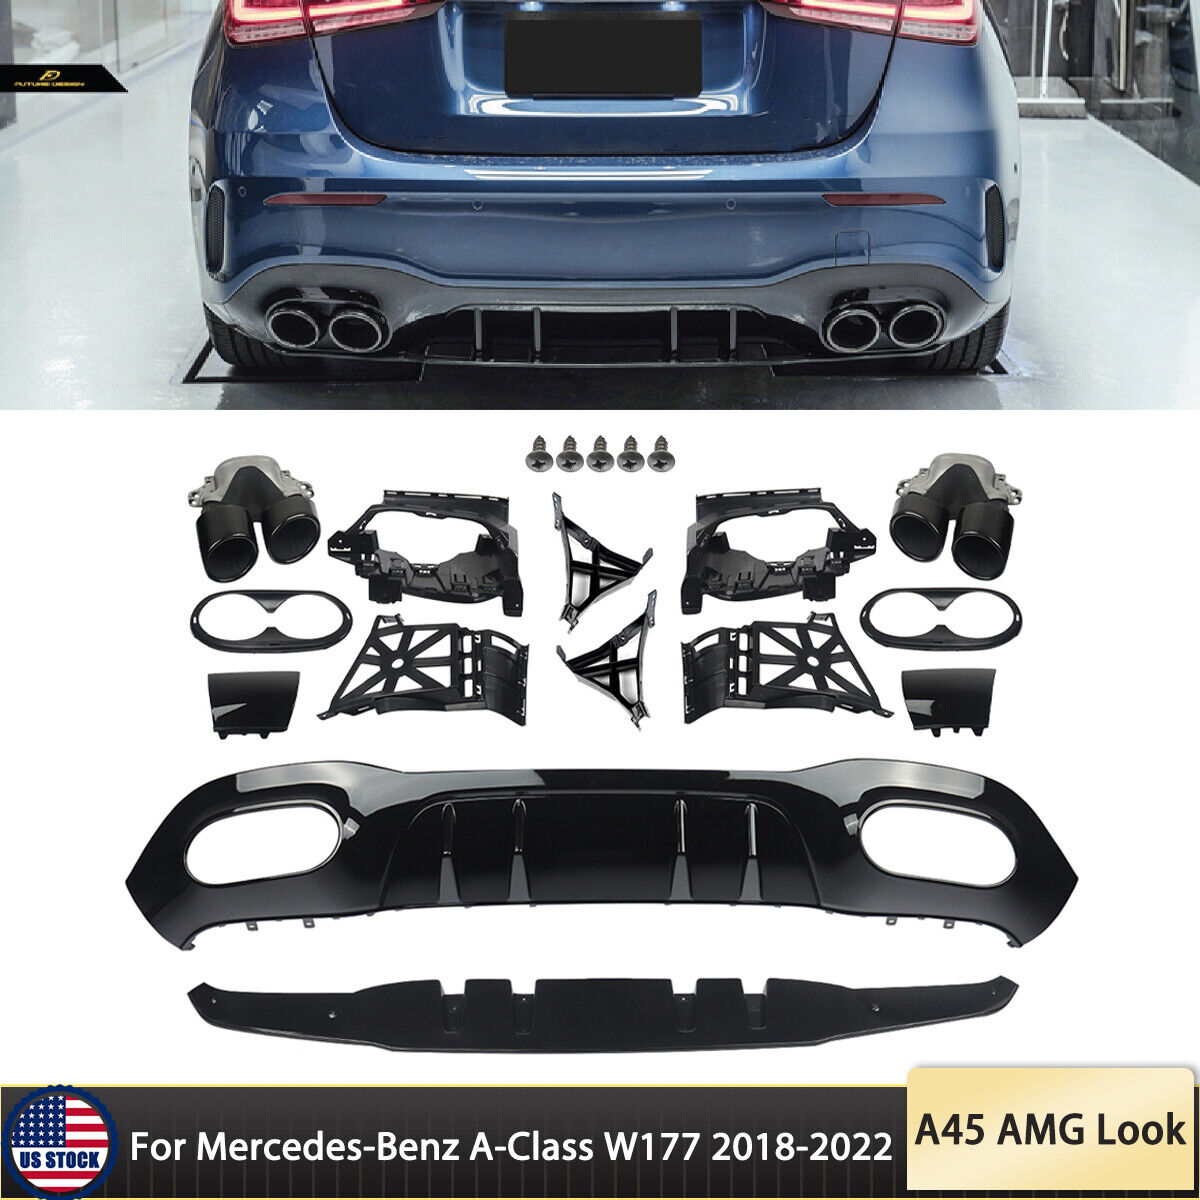 Rear Diffuser Lip W/Exhaust Tips For Benz 2018-2022 W177 A200 A250 A45 AMG Style